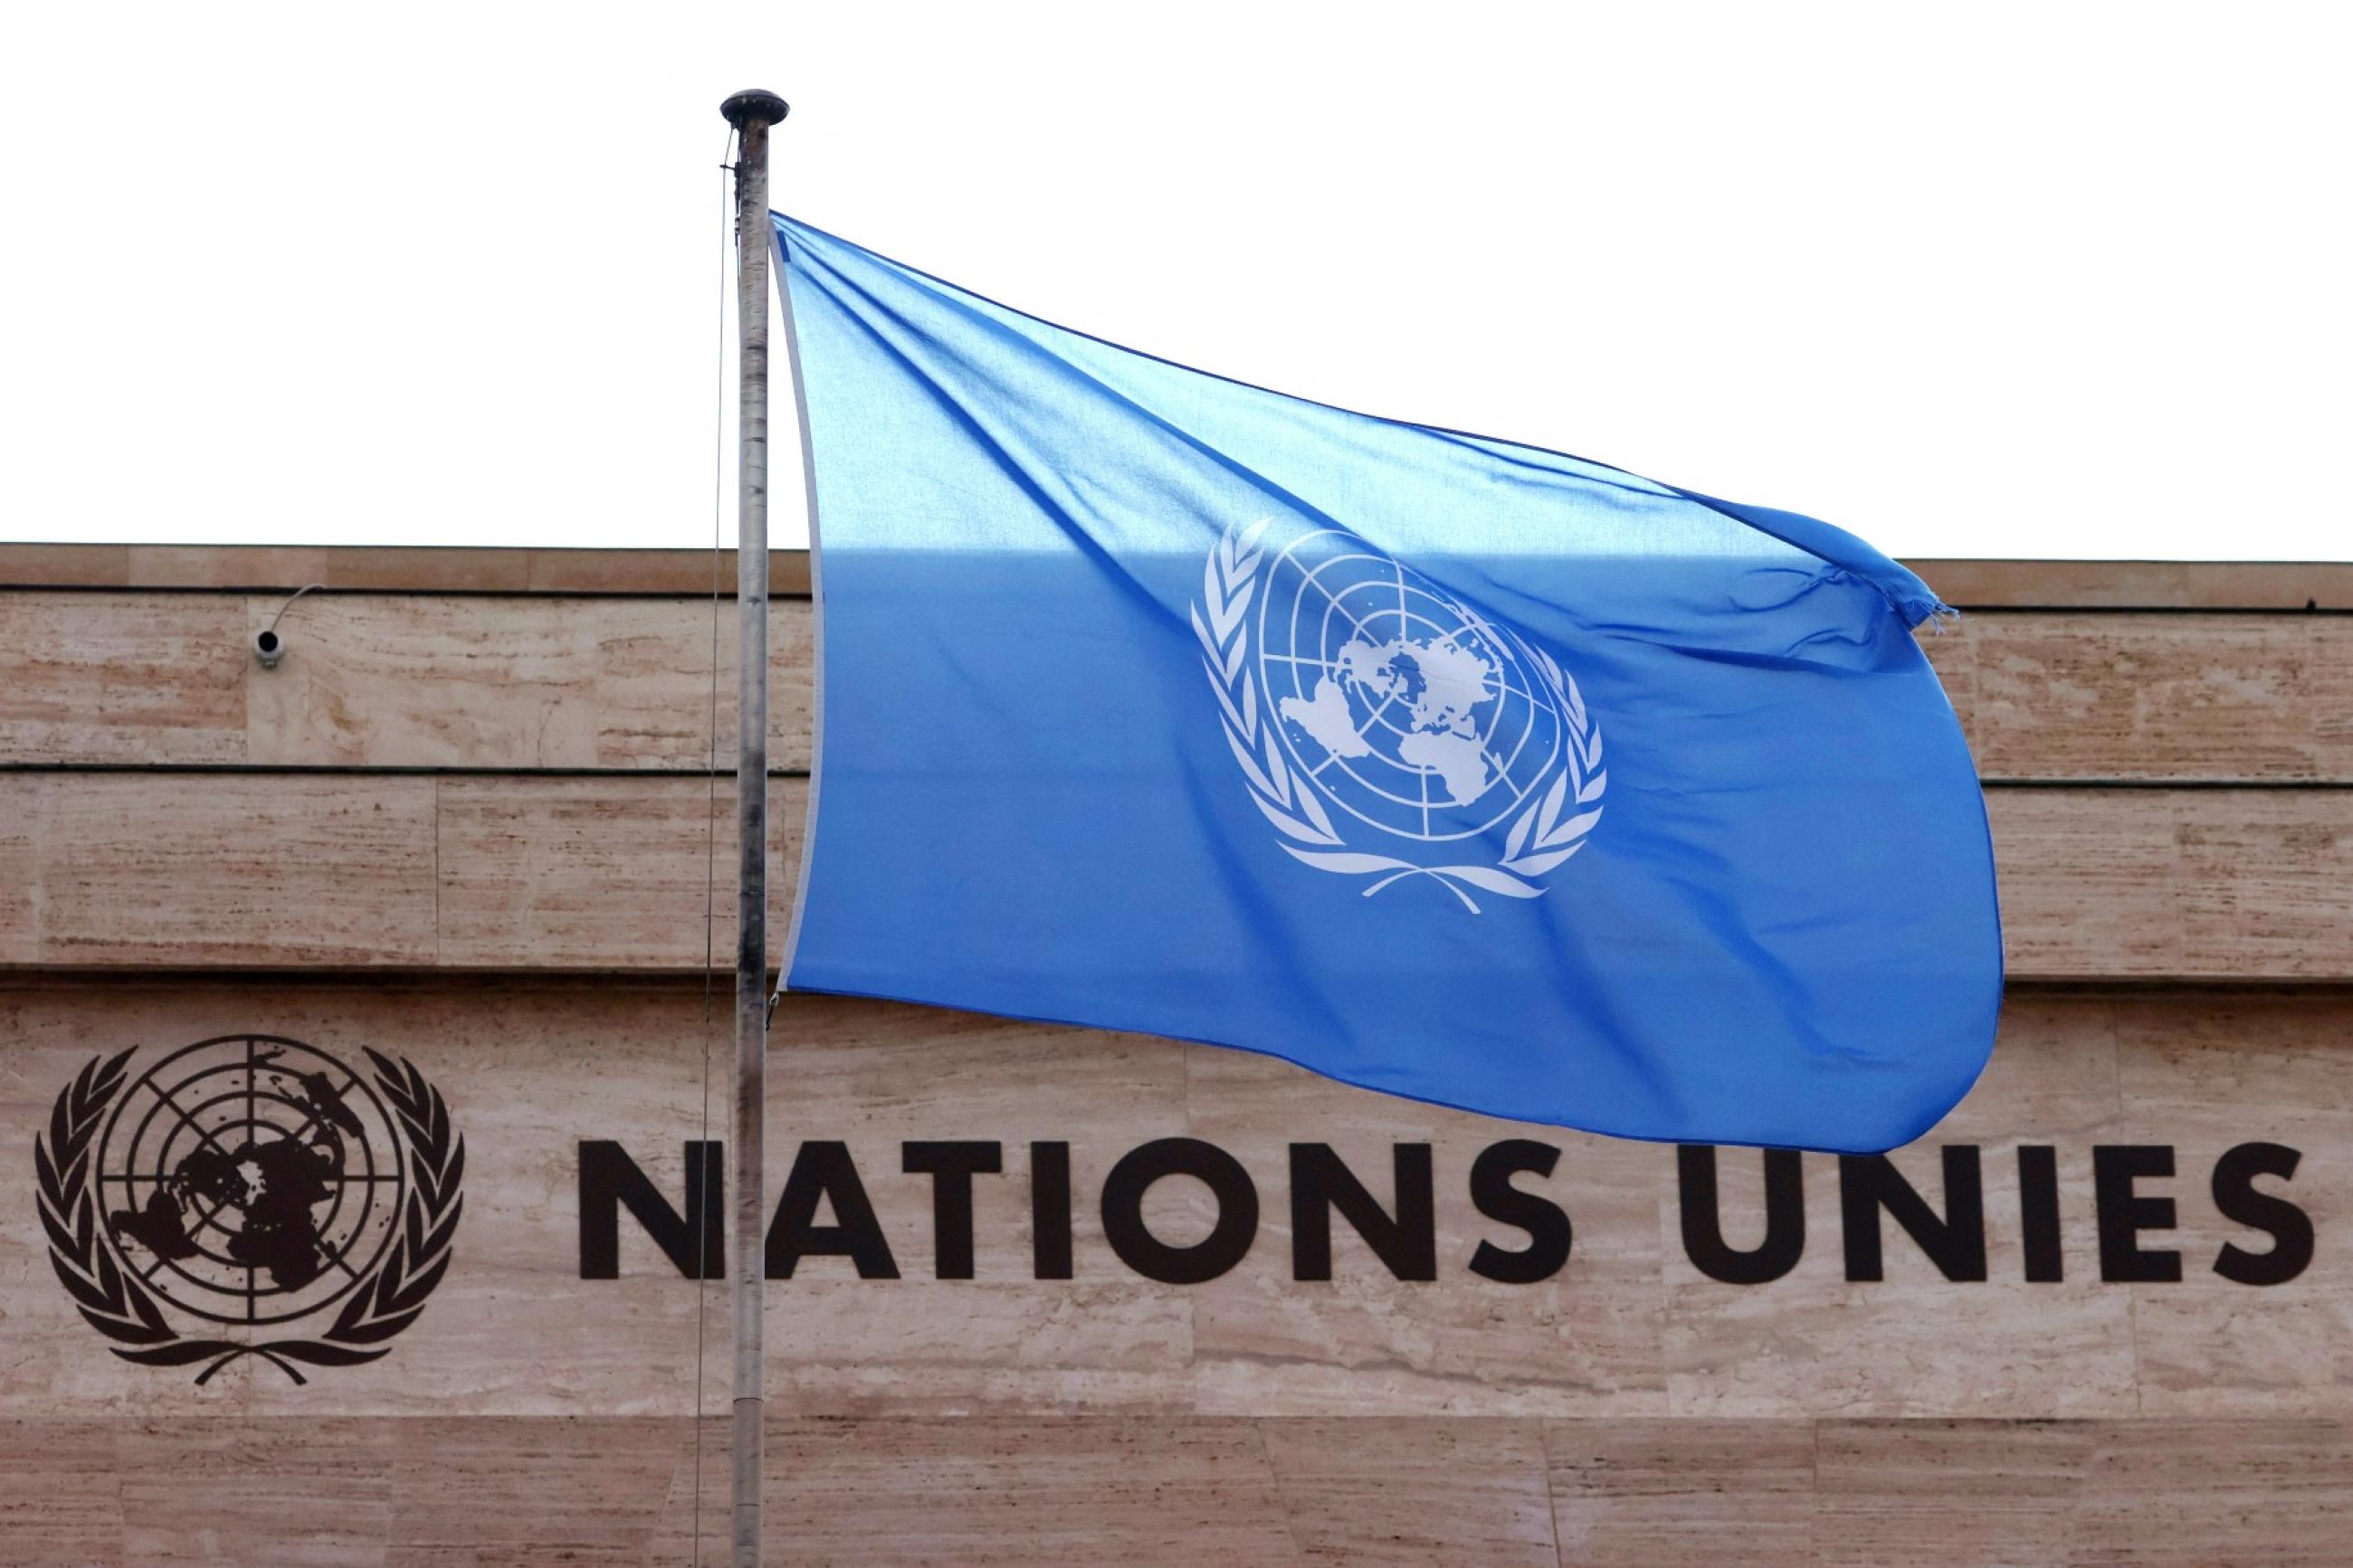 A flag is seen on a building during the Human Rights Council at the United Nations in Geneva, Switzerland, on February 27, 2023.